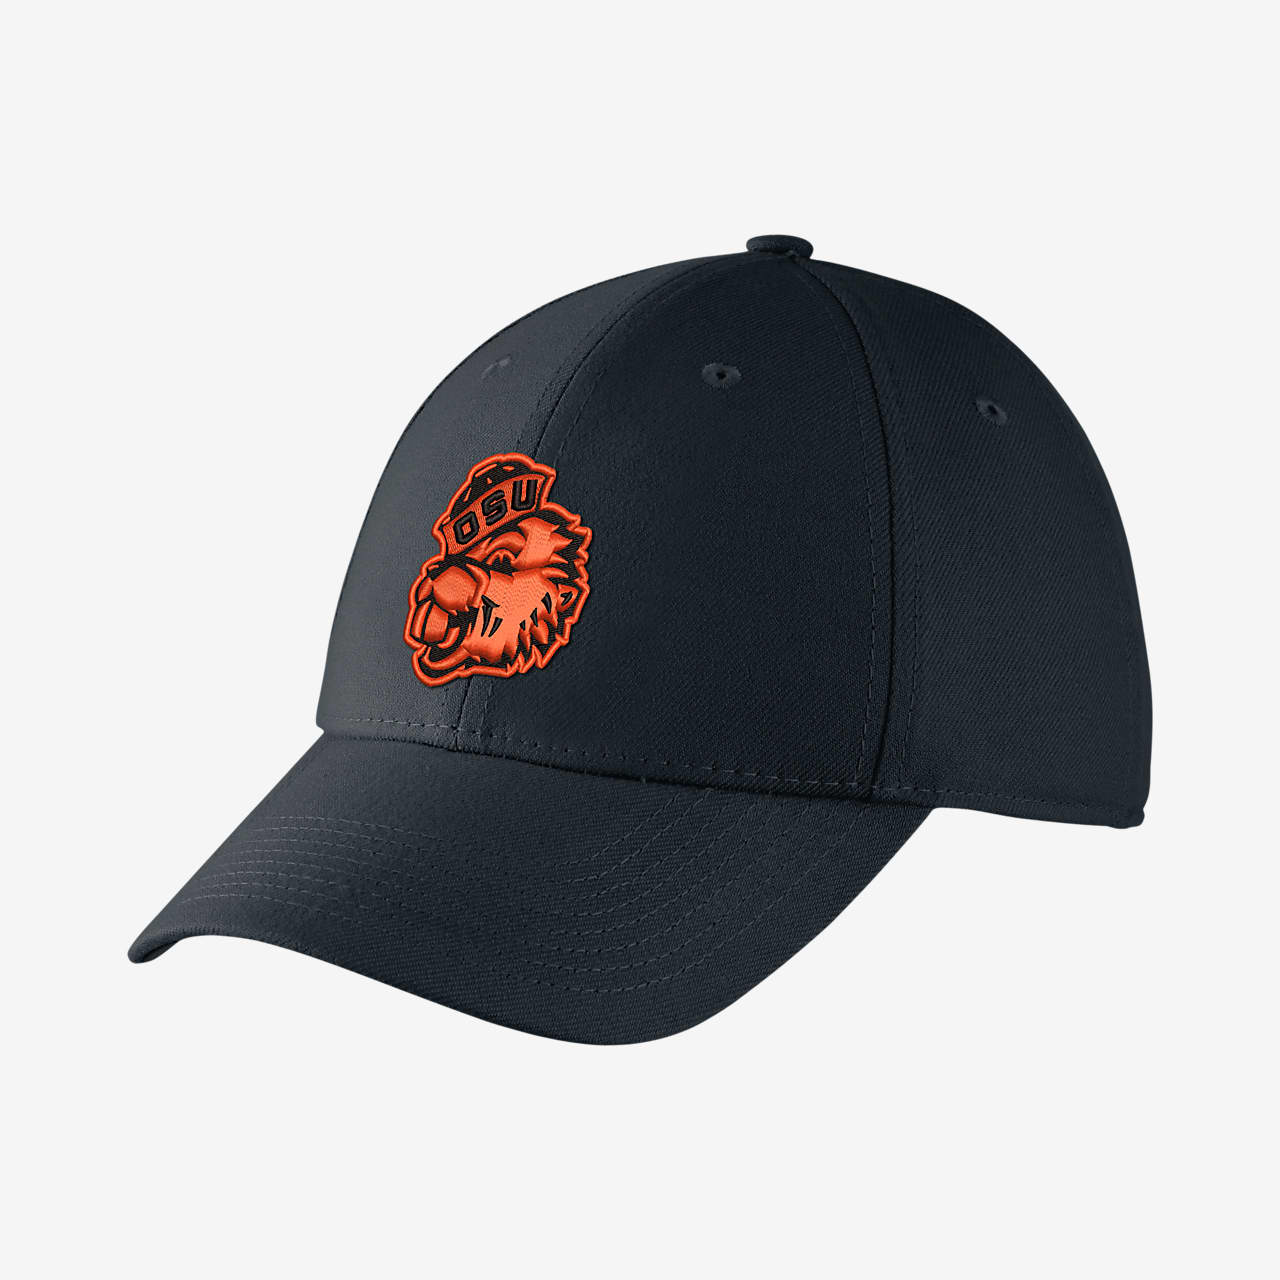 Nike College (Oregon State) Fitted Hat